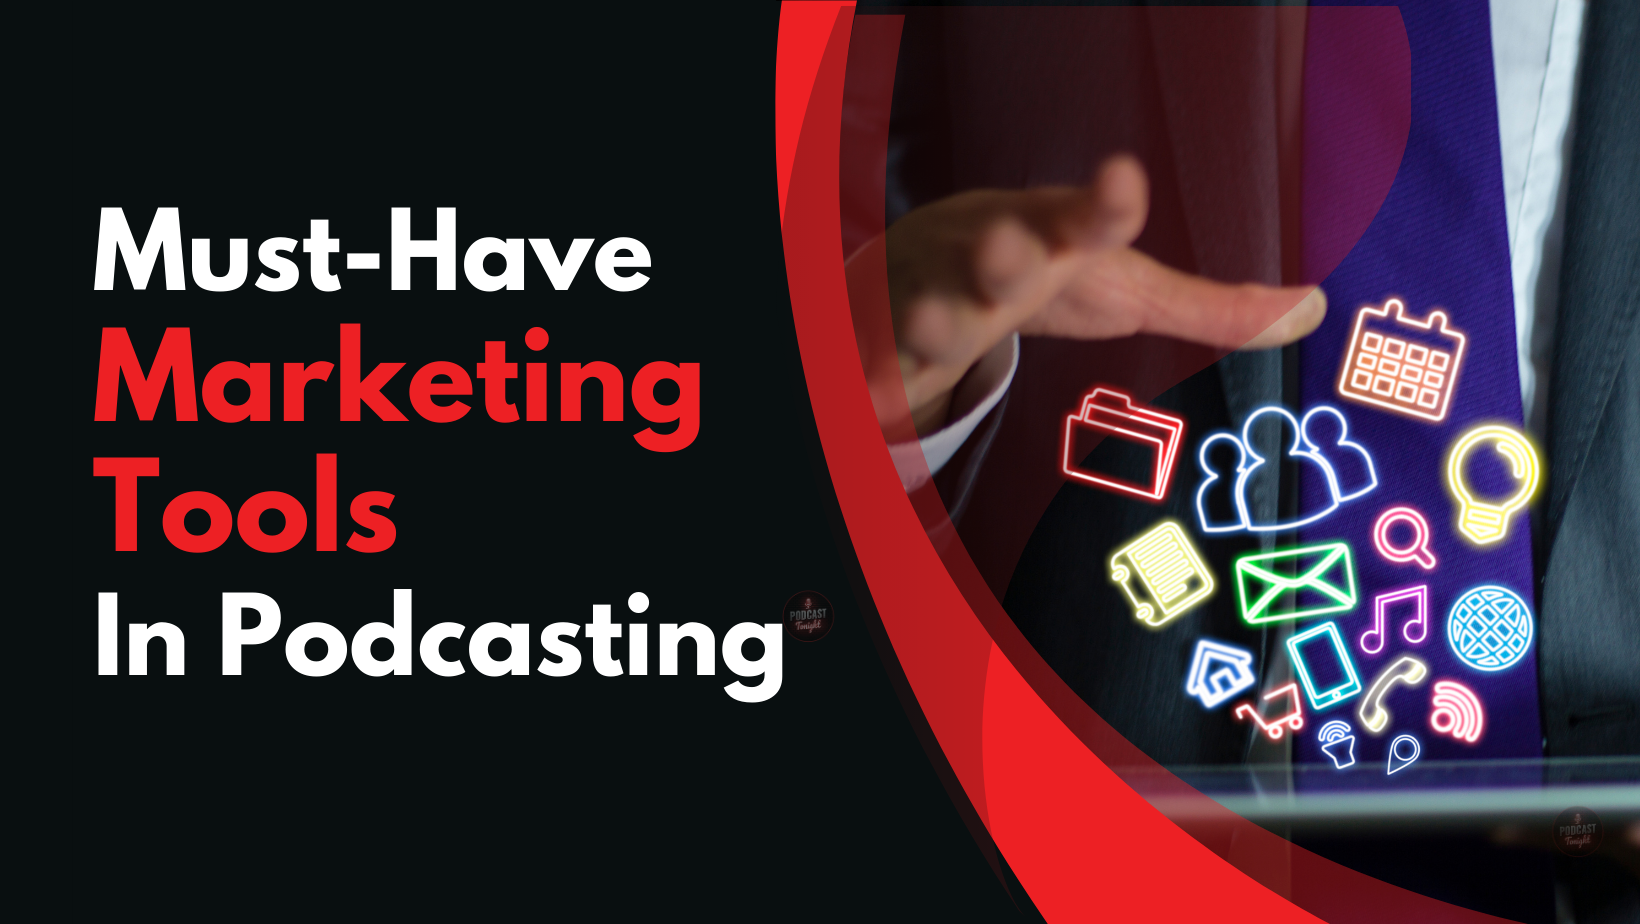 Must-Have Marketing Tools In Podcasting